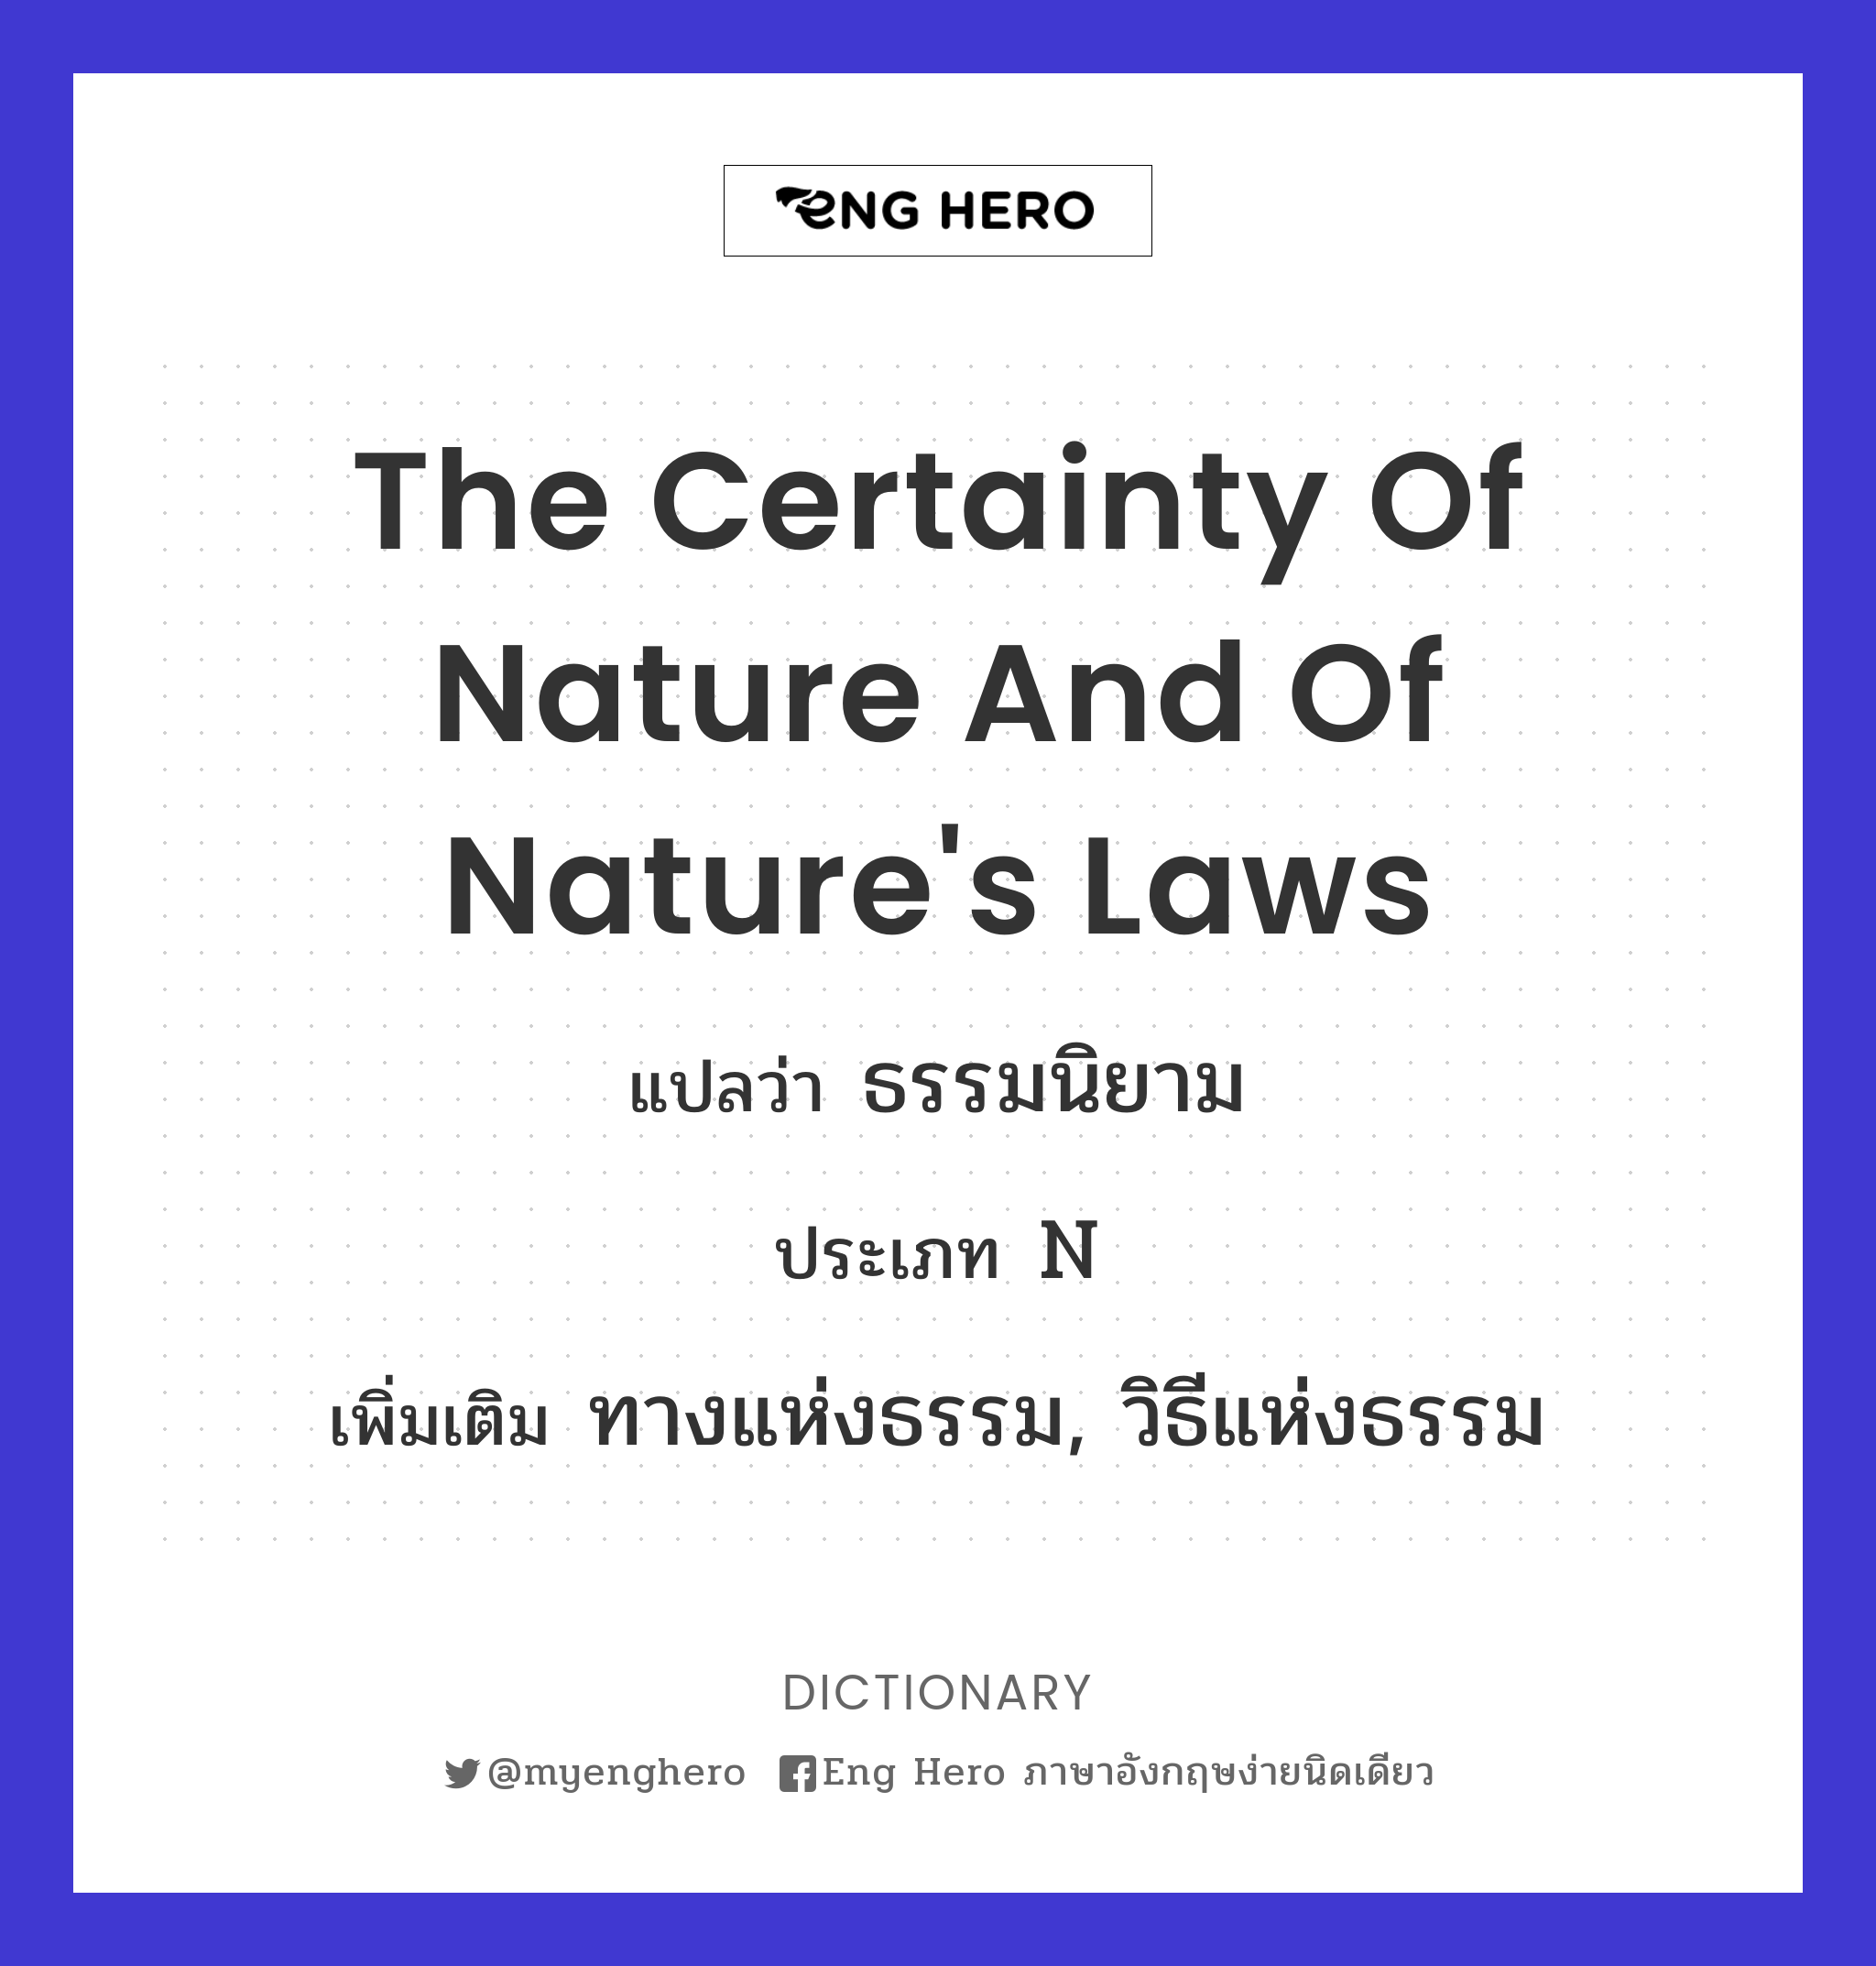 the certainty of nature and of nature's laws